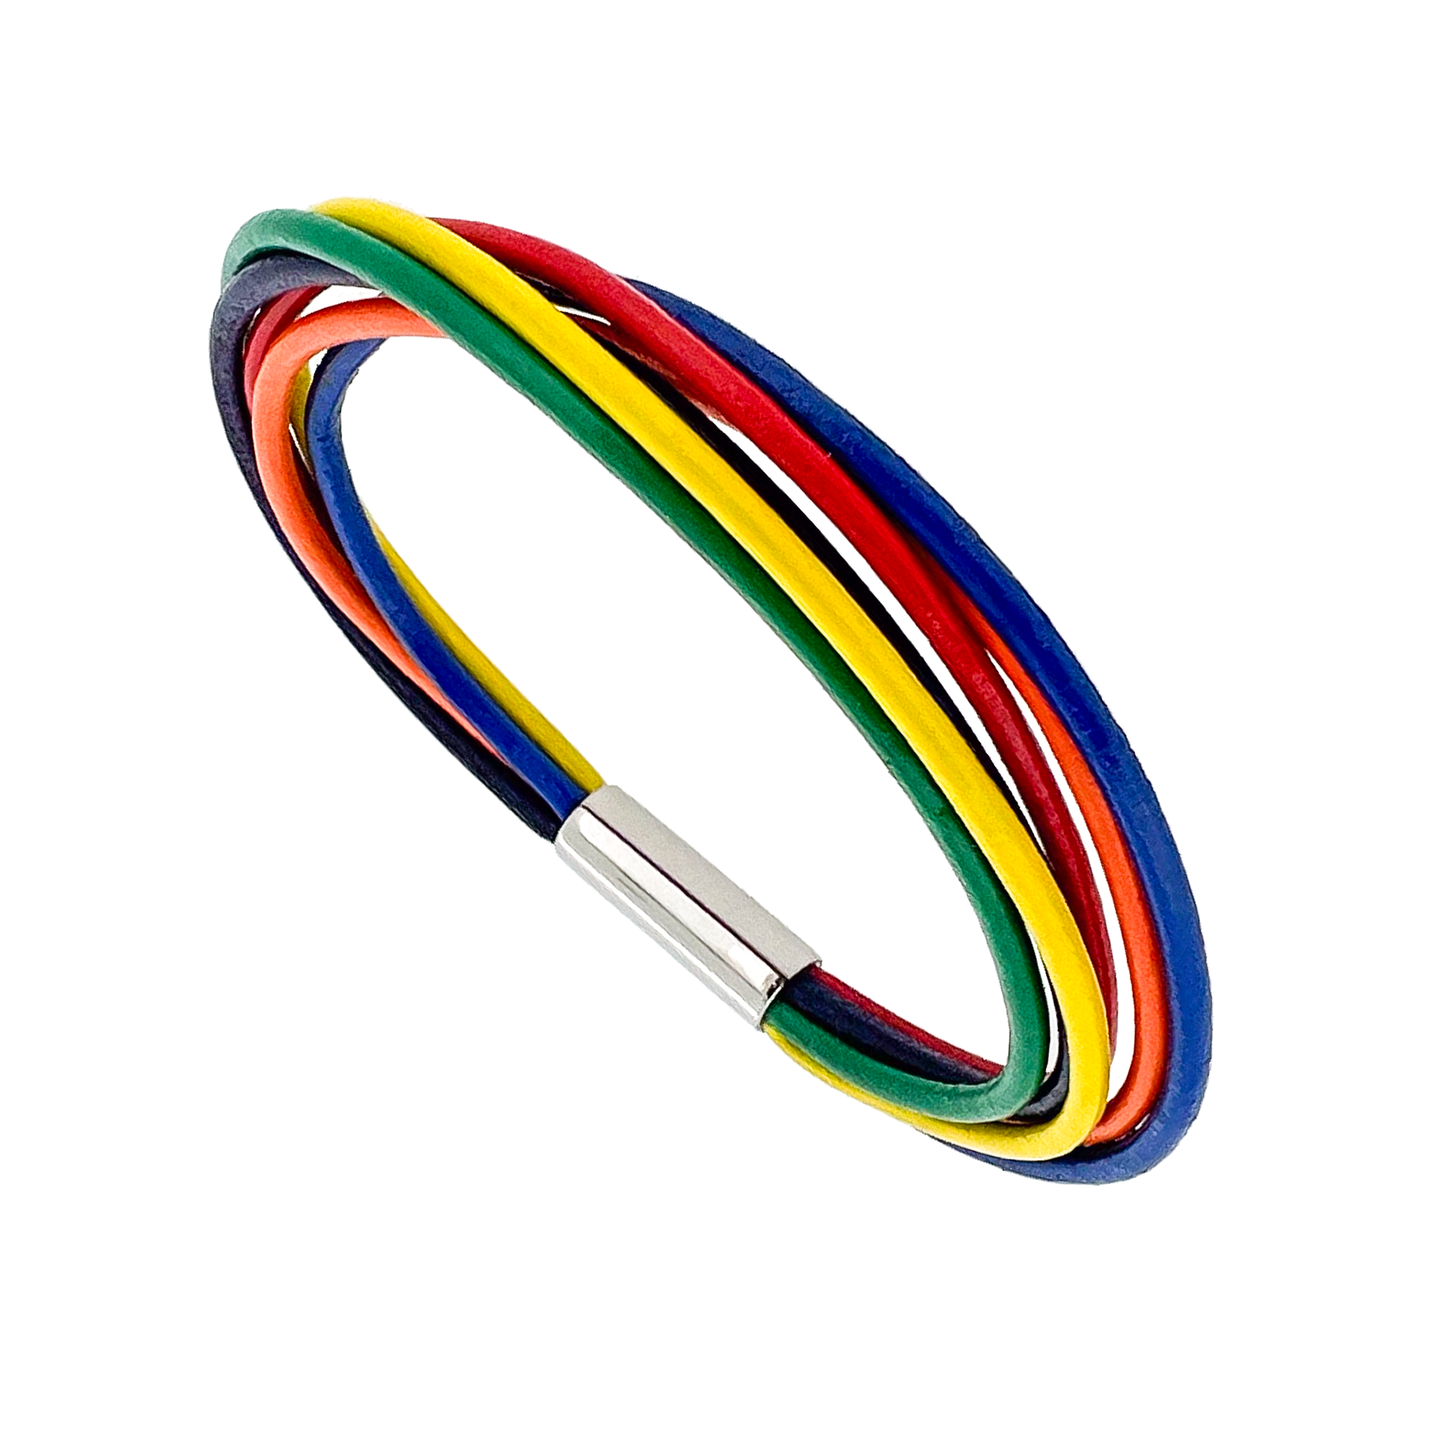 Rainbow Street Bracelet - 6 colors (orange, yellow, red, green, blue, purple) leather 2mm with titanium magnetic lock - surface polished